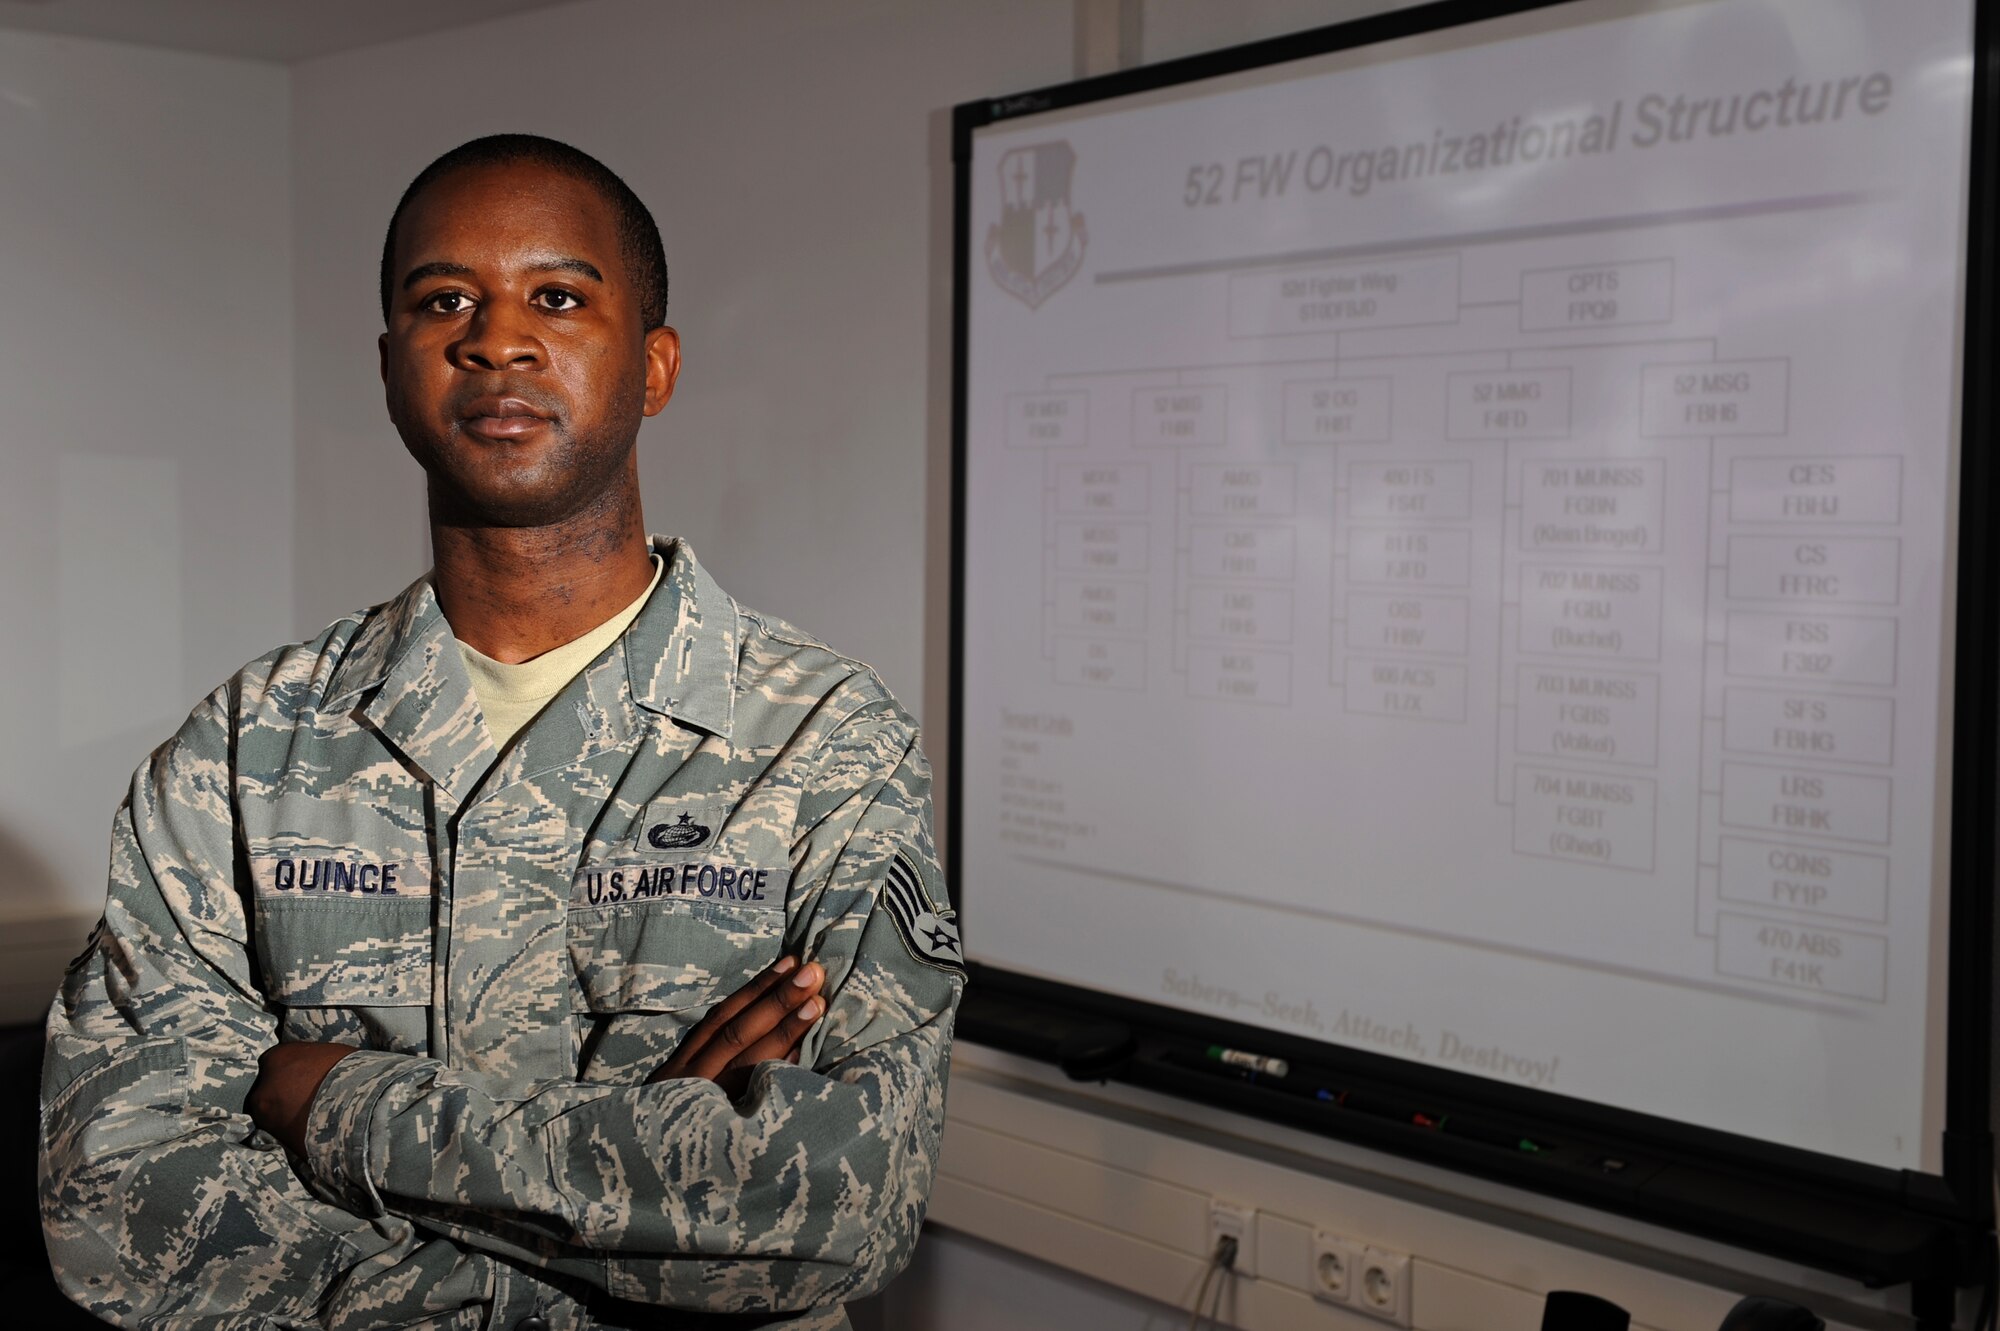 SPANGDAHLEM AIR BASE, Germany -- Staff Sgt. Reginald Quince, 52nd Force Support Squadron manpower analyst, is the Super Saber Performer for the week of Feb. 23 – March 1. (U.S. Air Force photo by Airman 1st Class Matthew B. Fredericks/Realeased)